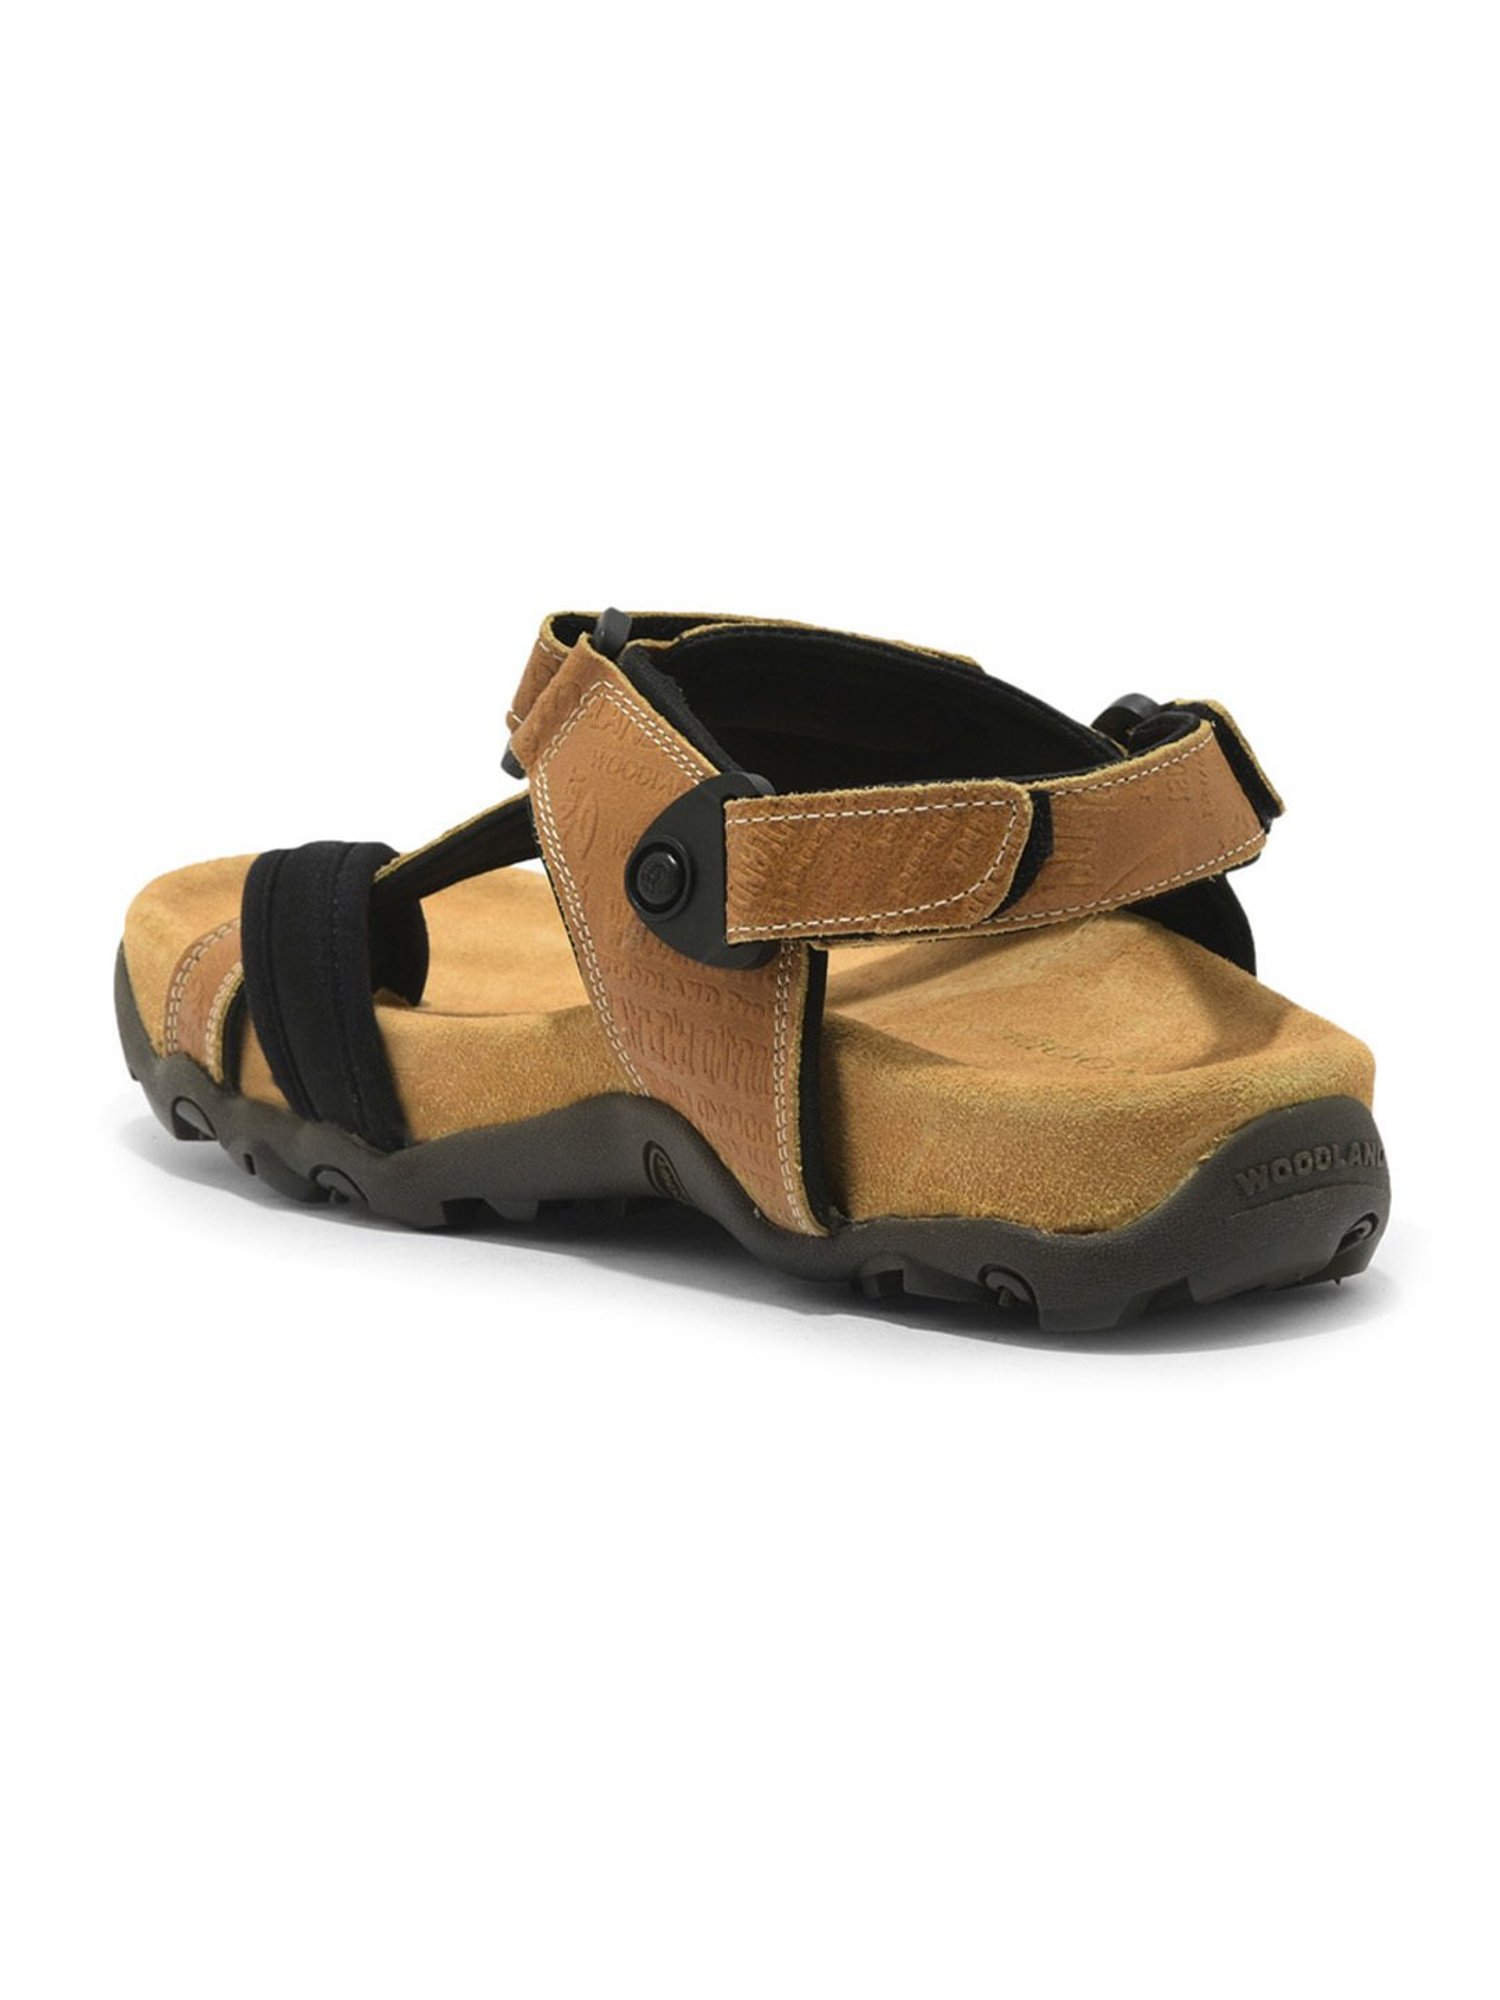 Discover more than 124 woodland sandals 50 discount latest